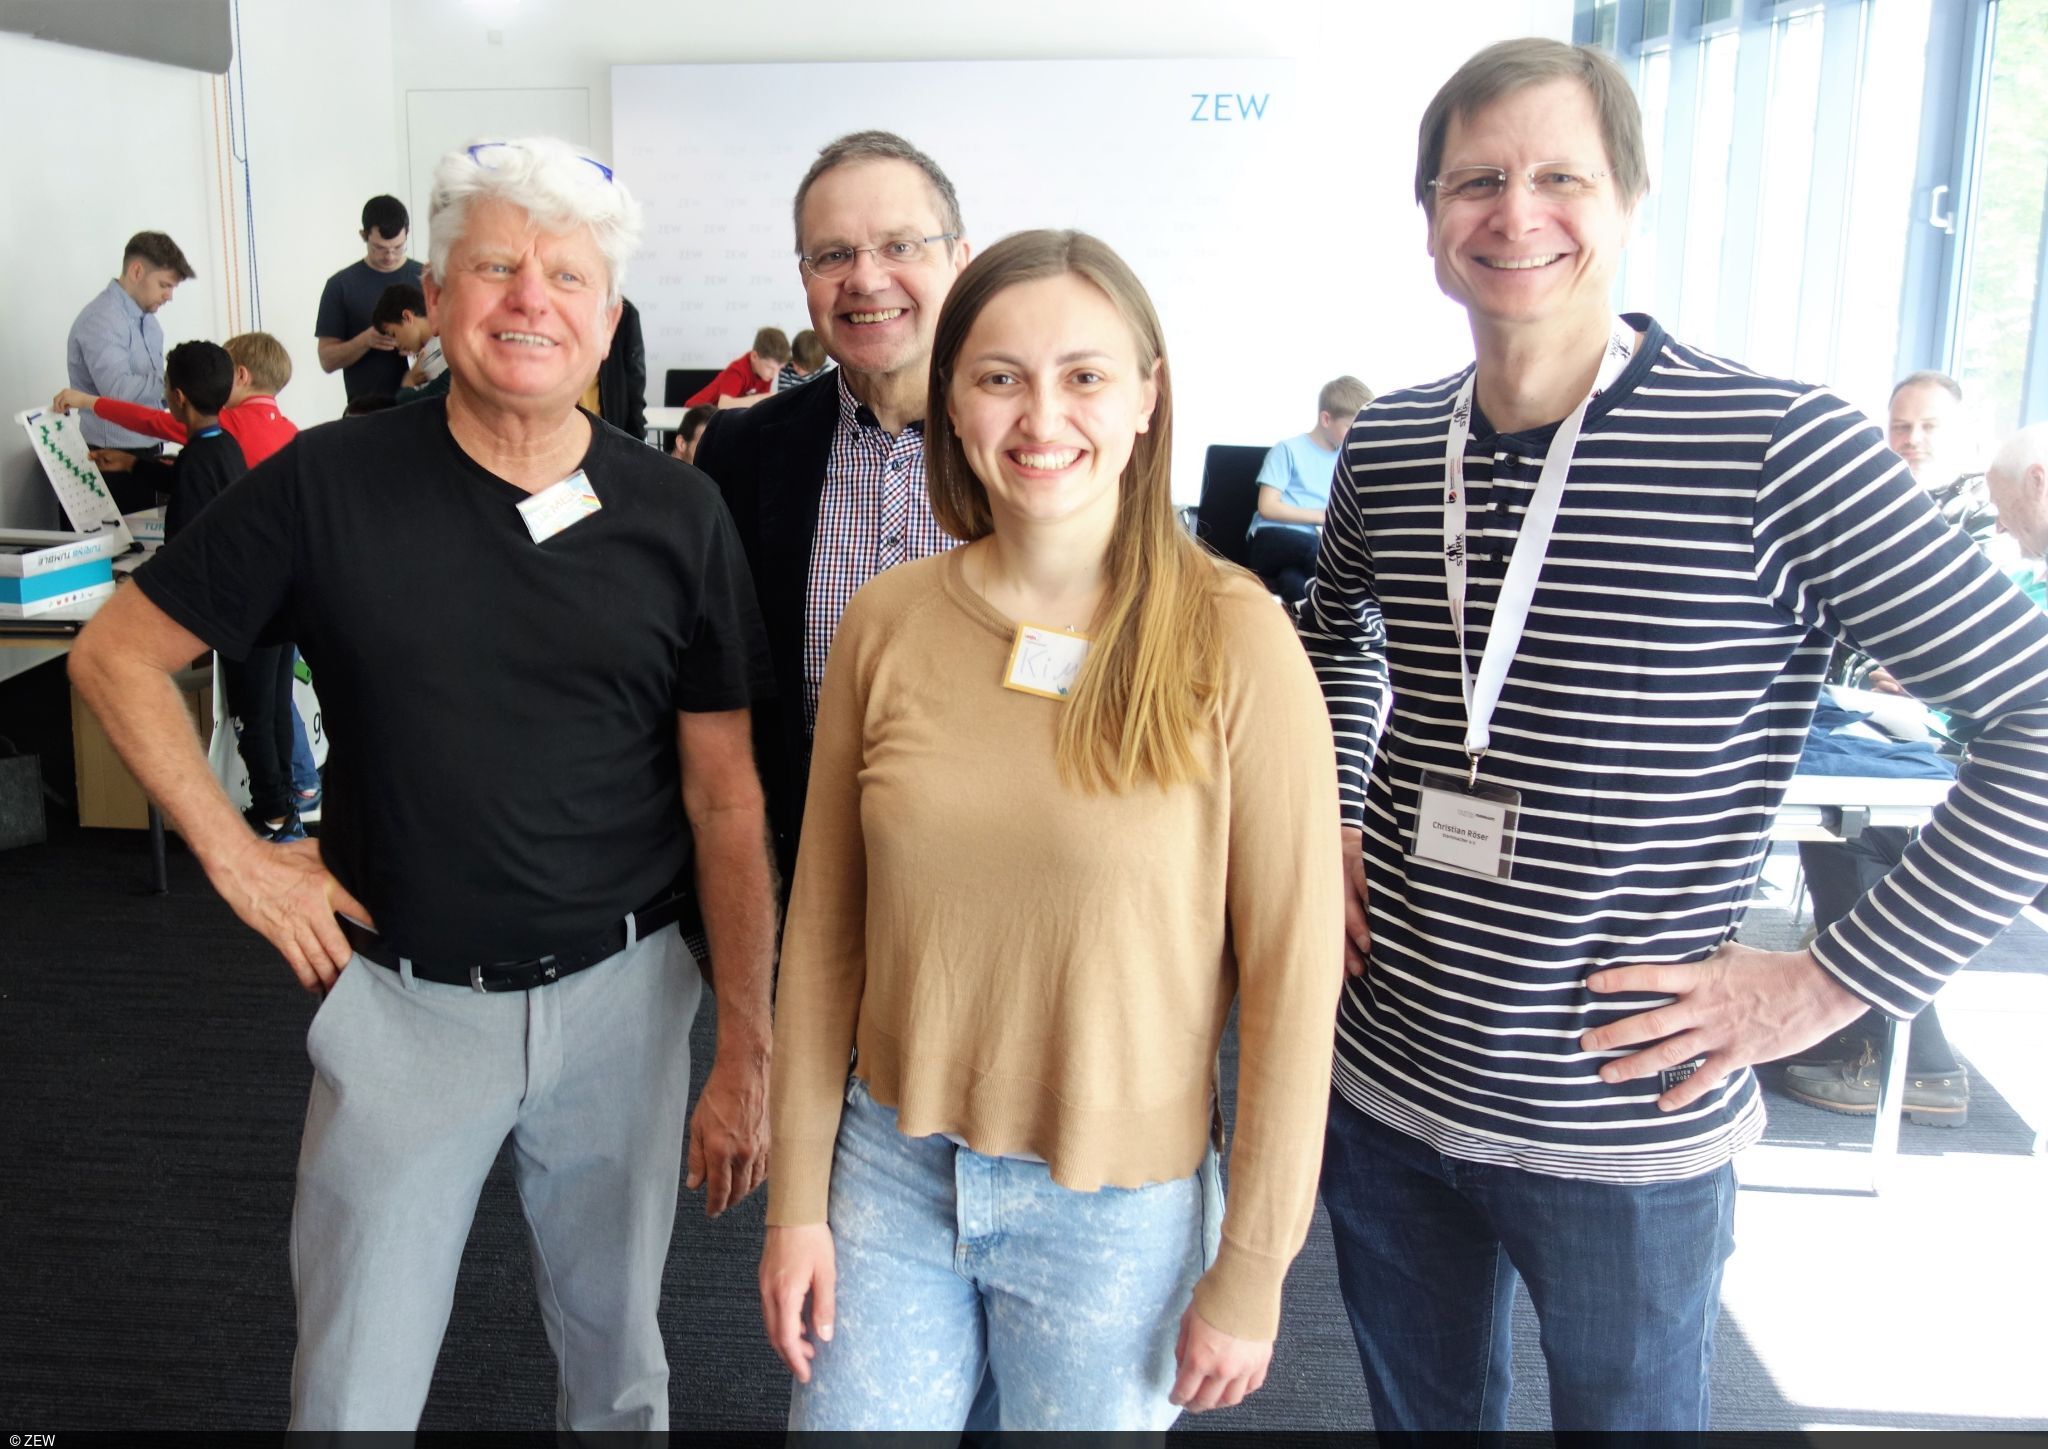 Group picture with four people, from left to right: A man with gray hair, ZEW Director Thomas Kohl, a young woman with long blond hair, a man with brown hair and glasses.